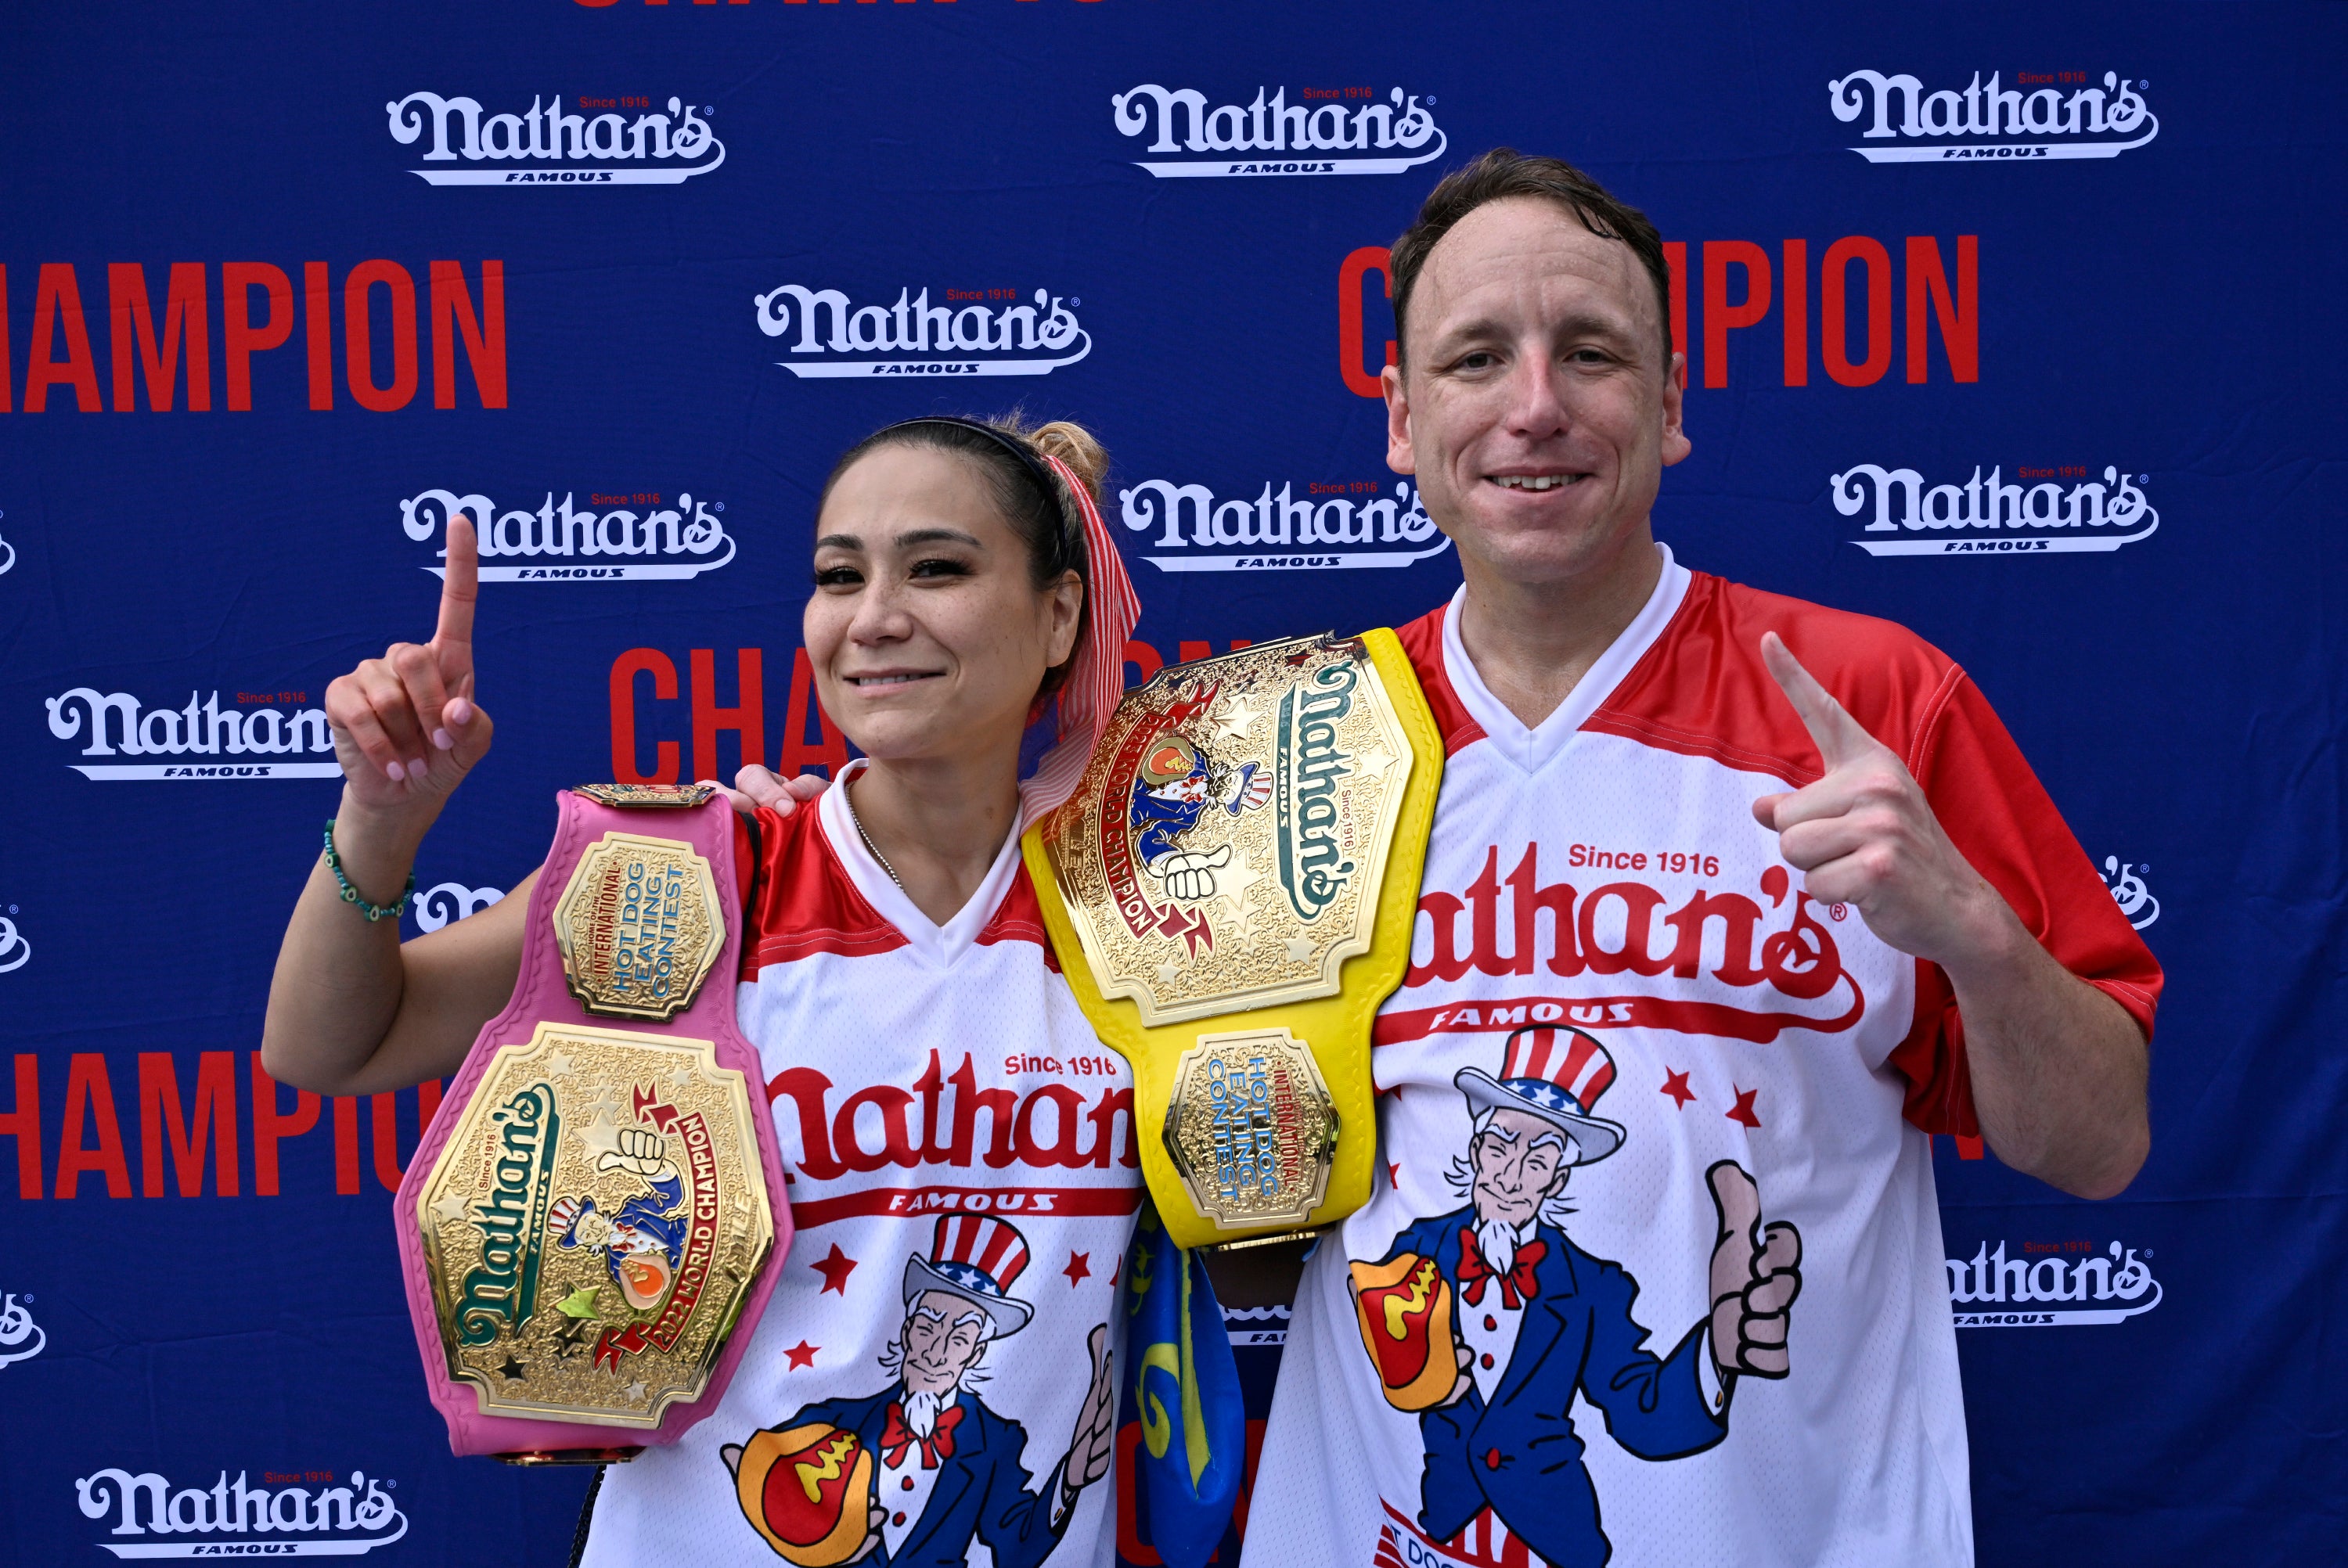 Nathan's Famous Hot Dog Eating Contest, 2021